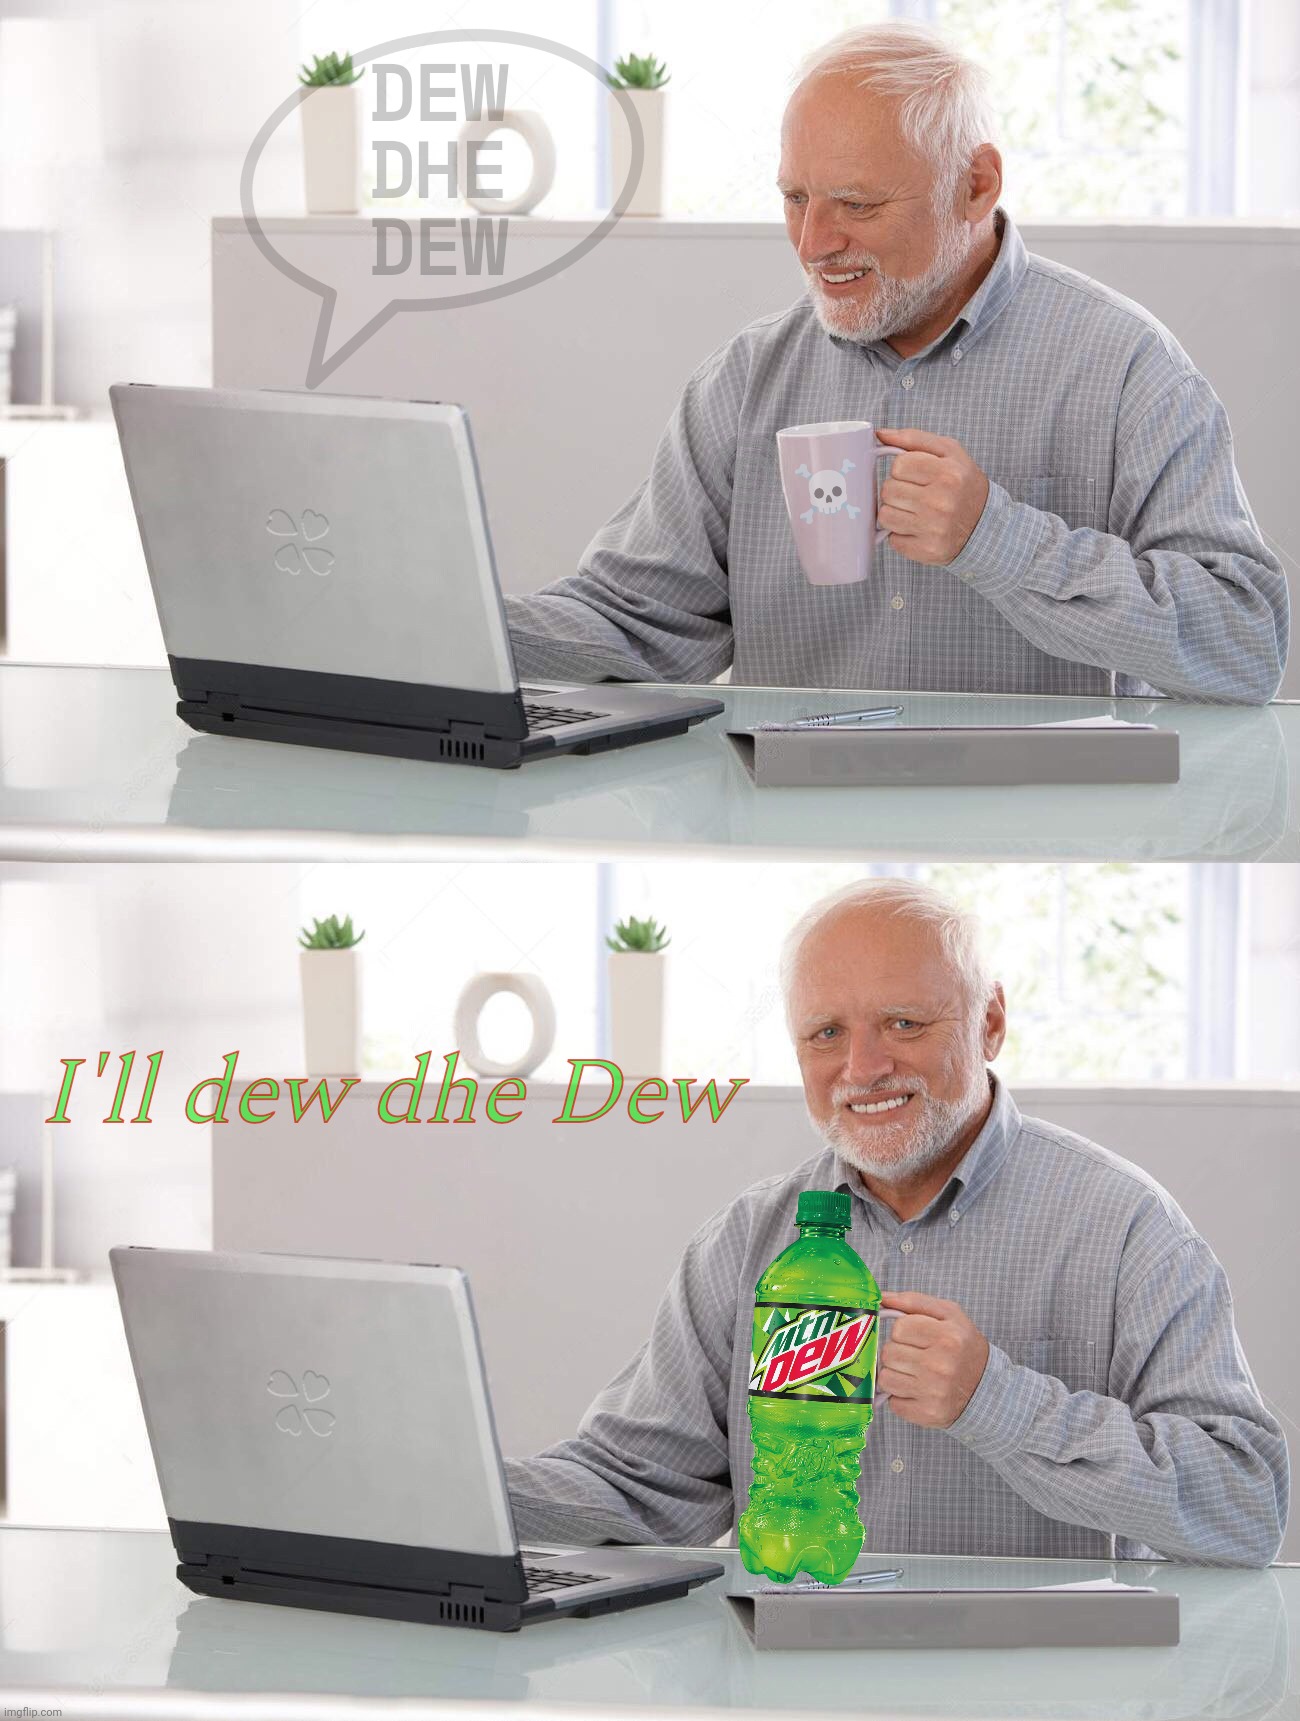 Even the Interwebz agree - dhe Dew iz dhe wae | DEW
DHE
DEW; ☠️; I'll dew dhe Dew | image tagged in old man cup of coffee,mountain dew,dew dhe dew,dew eet,big tent alliance party,don't do as they tell you just dew dhe dew | made w/ Imgflip meme maker